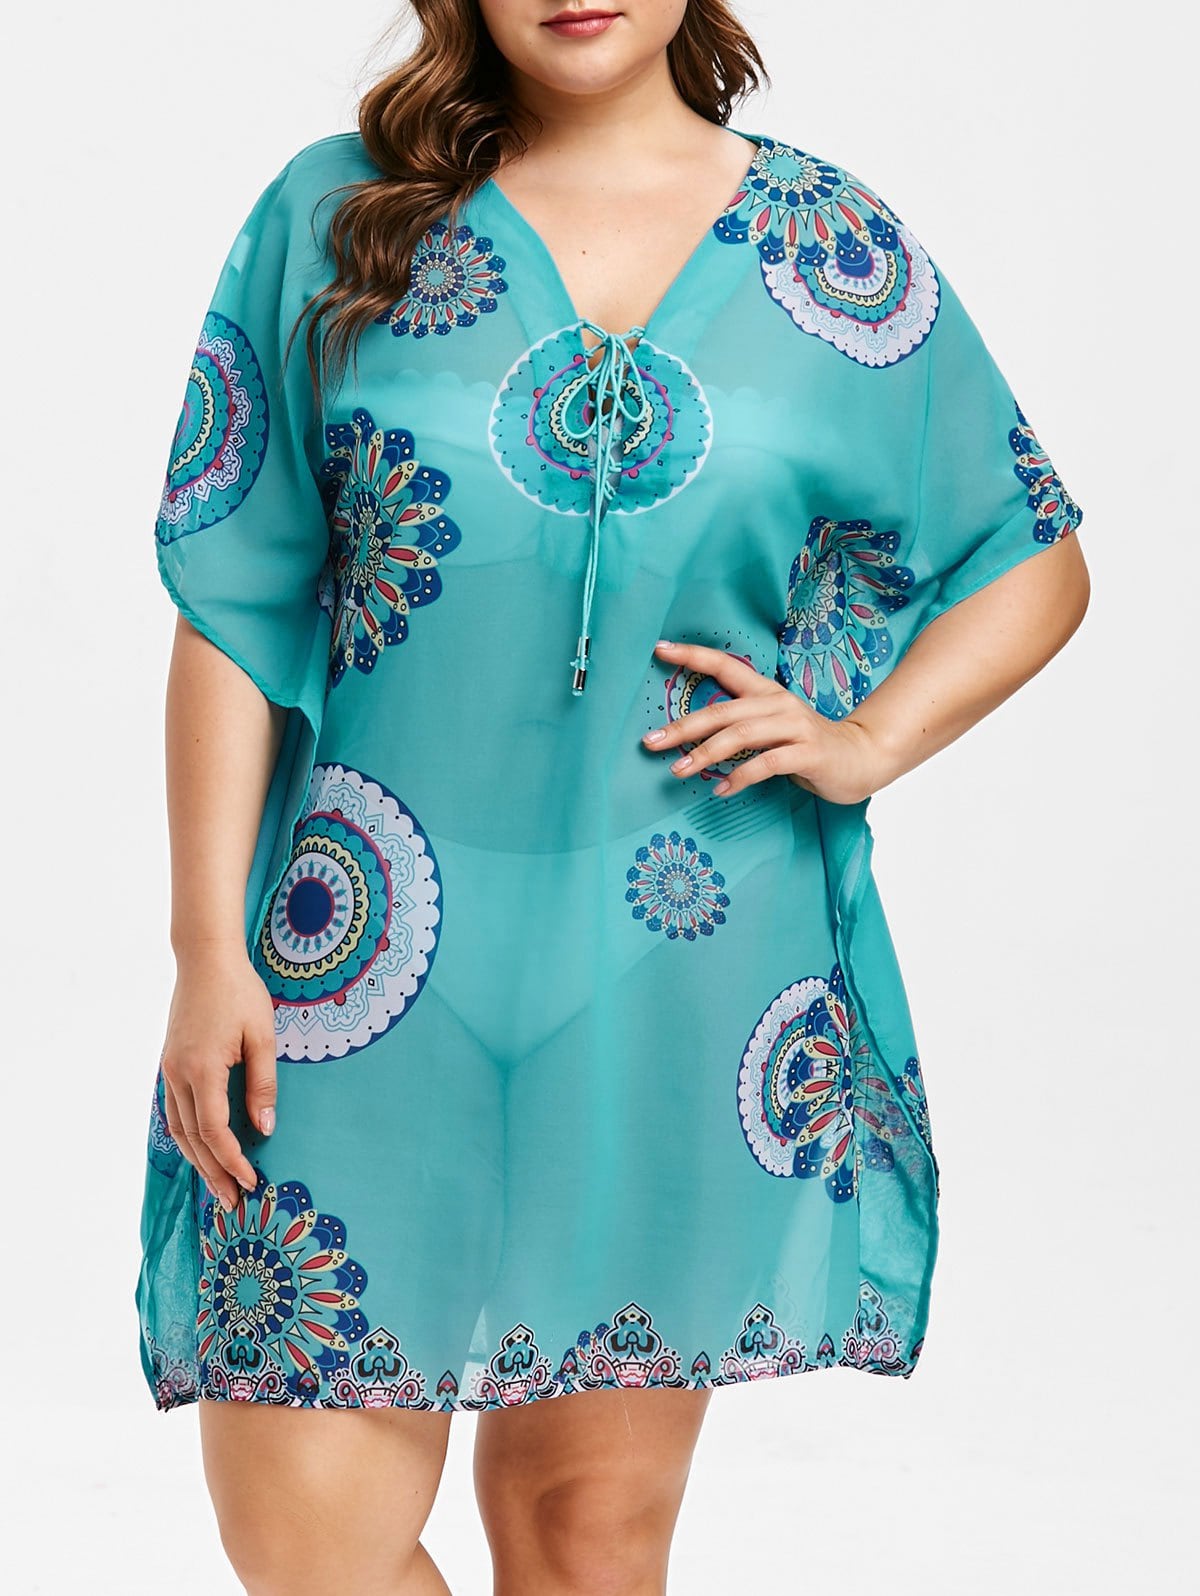 Lotus Print Plus Size Lace Up Cover Up